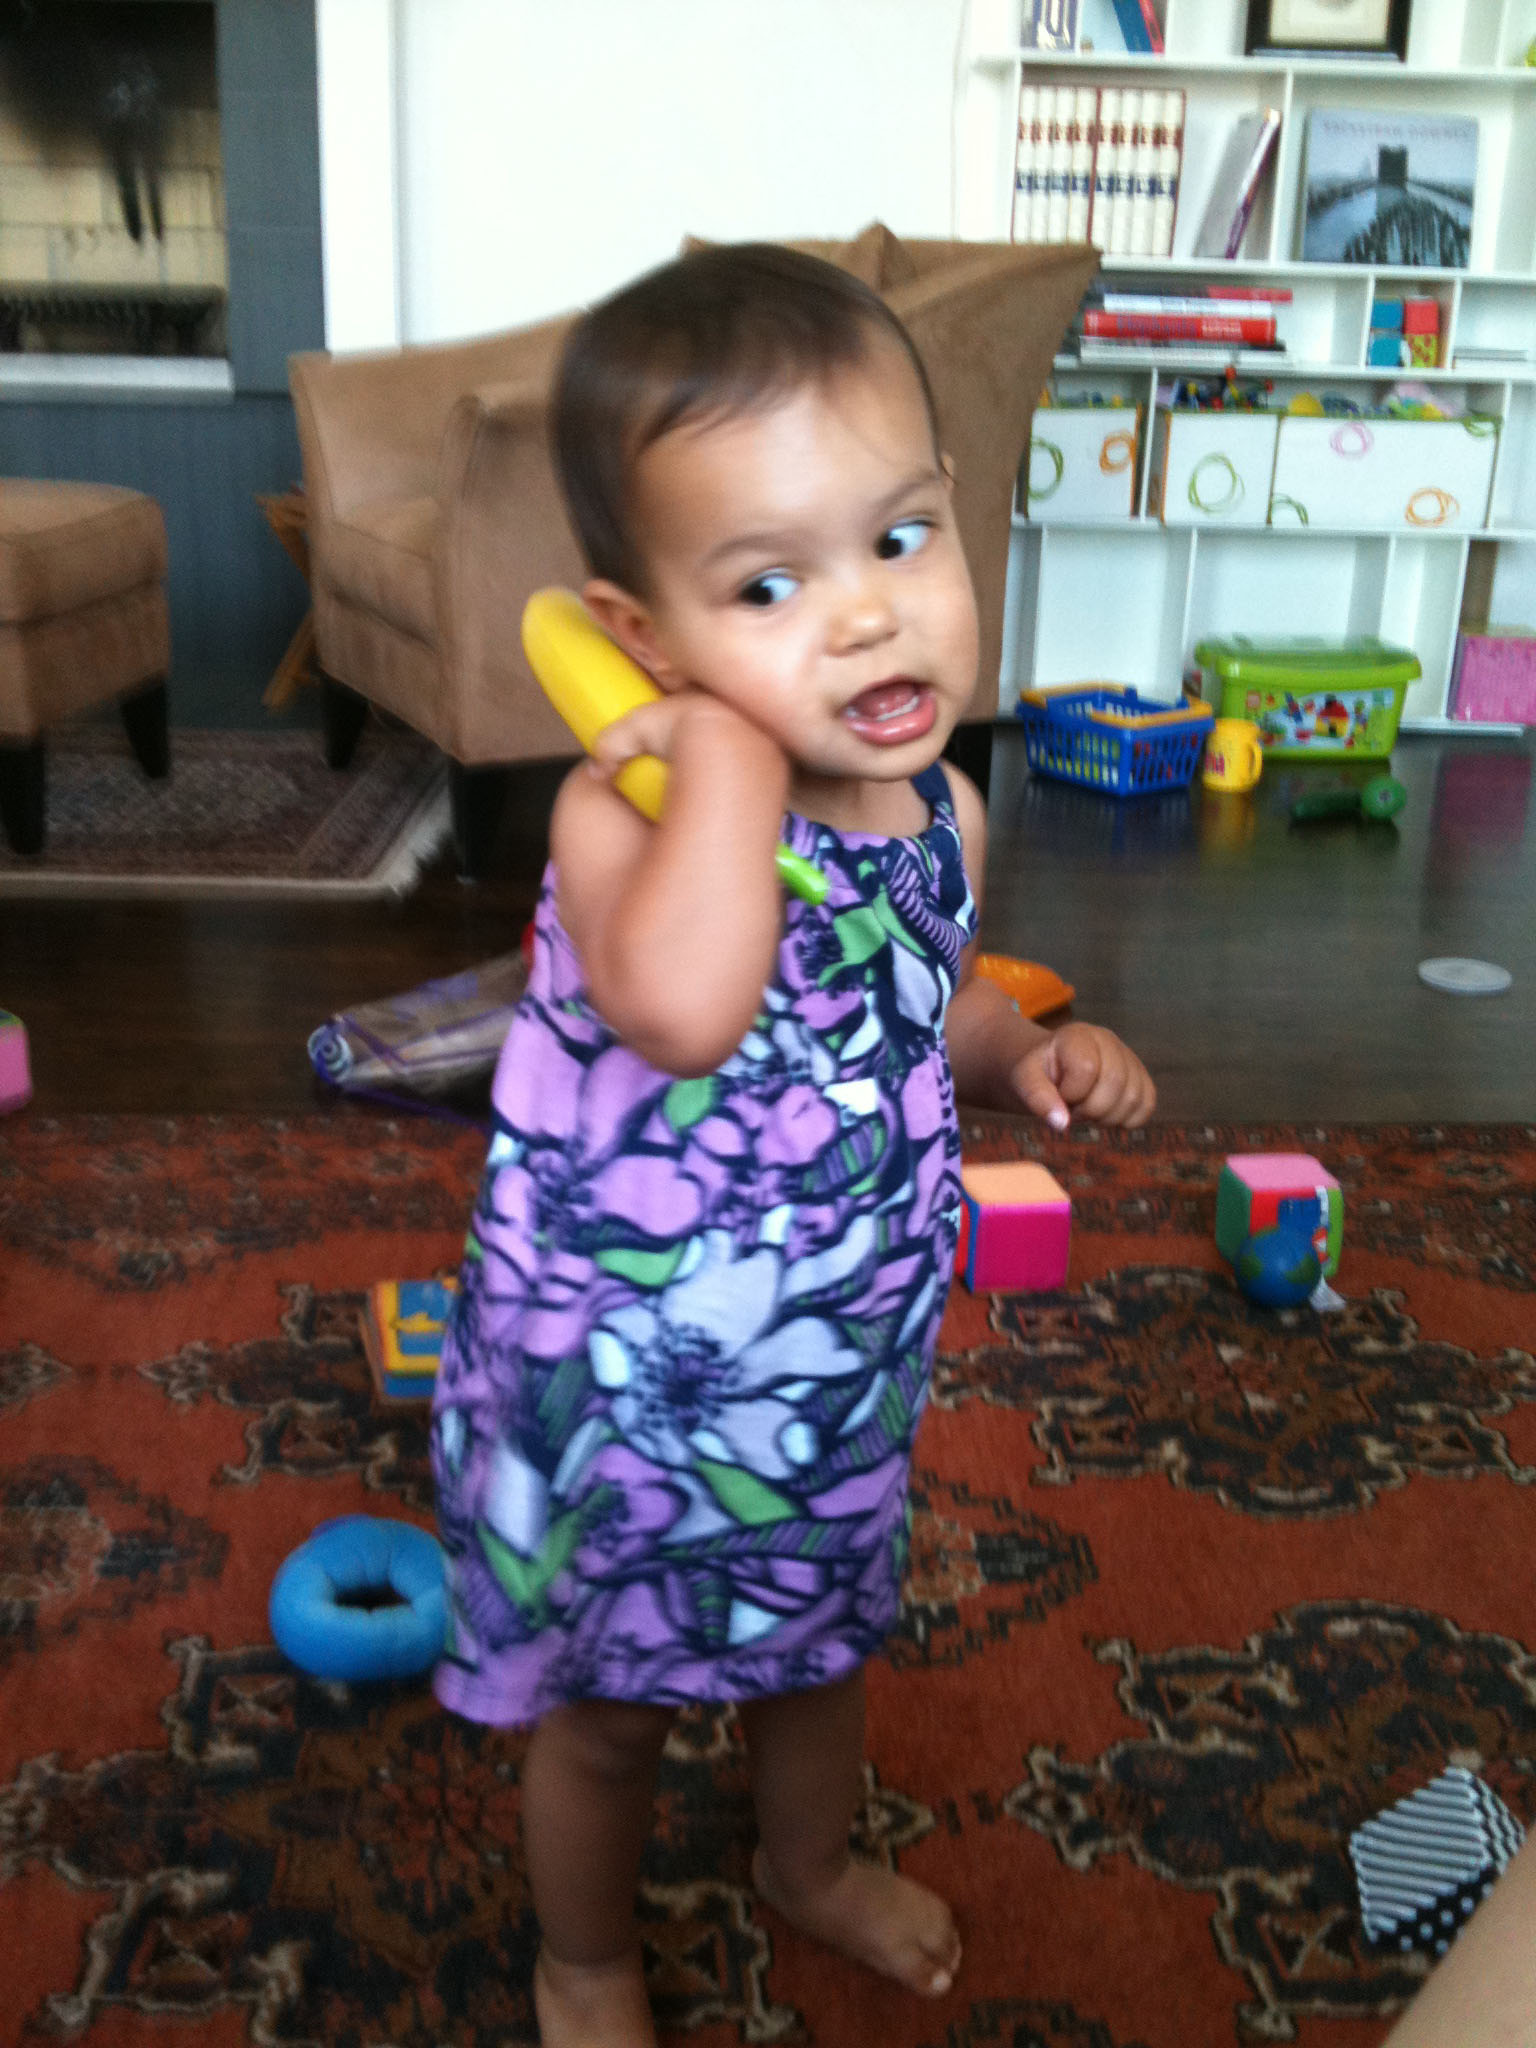 A toddler playing with a toy telephone.^[[Image](https://www.flickr.com/photos/salim/4787057545) by [Salim Virji](https://www.flickr.com/photos/salim/) is licensed under [CC BY-SA 2.0](https://creativecommons.org/licenses/by-sa/2.0/)]